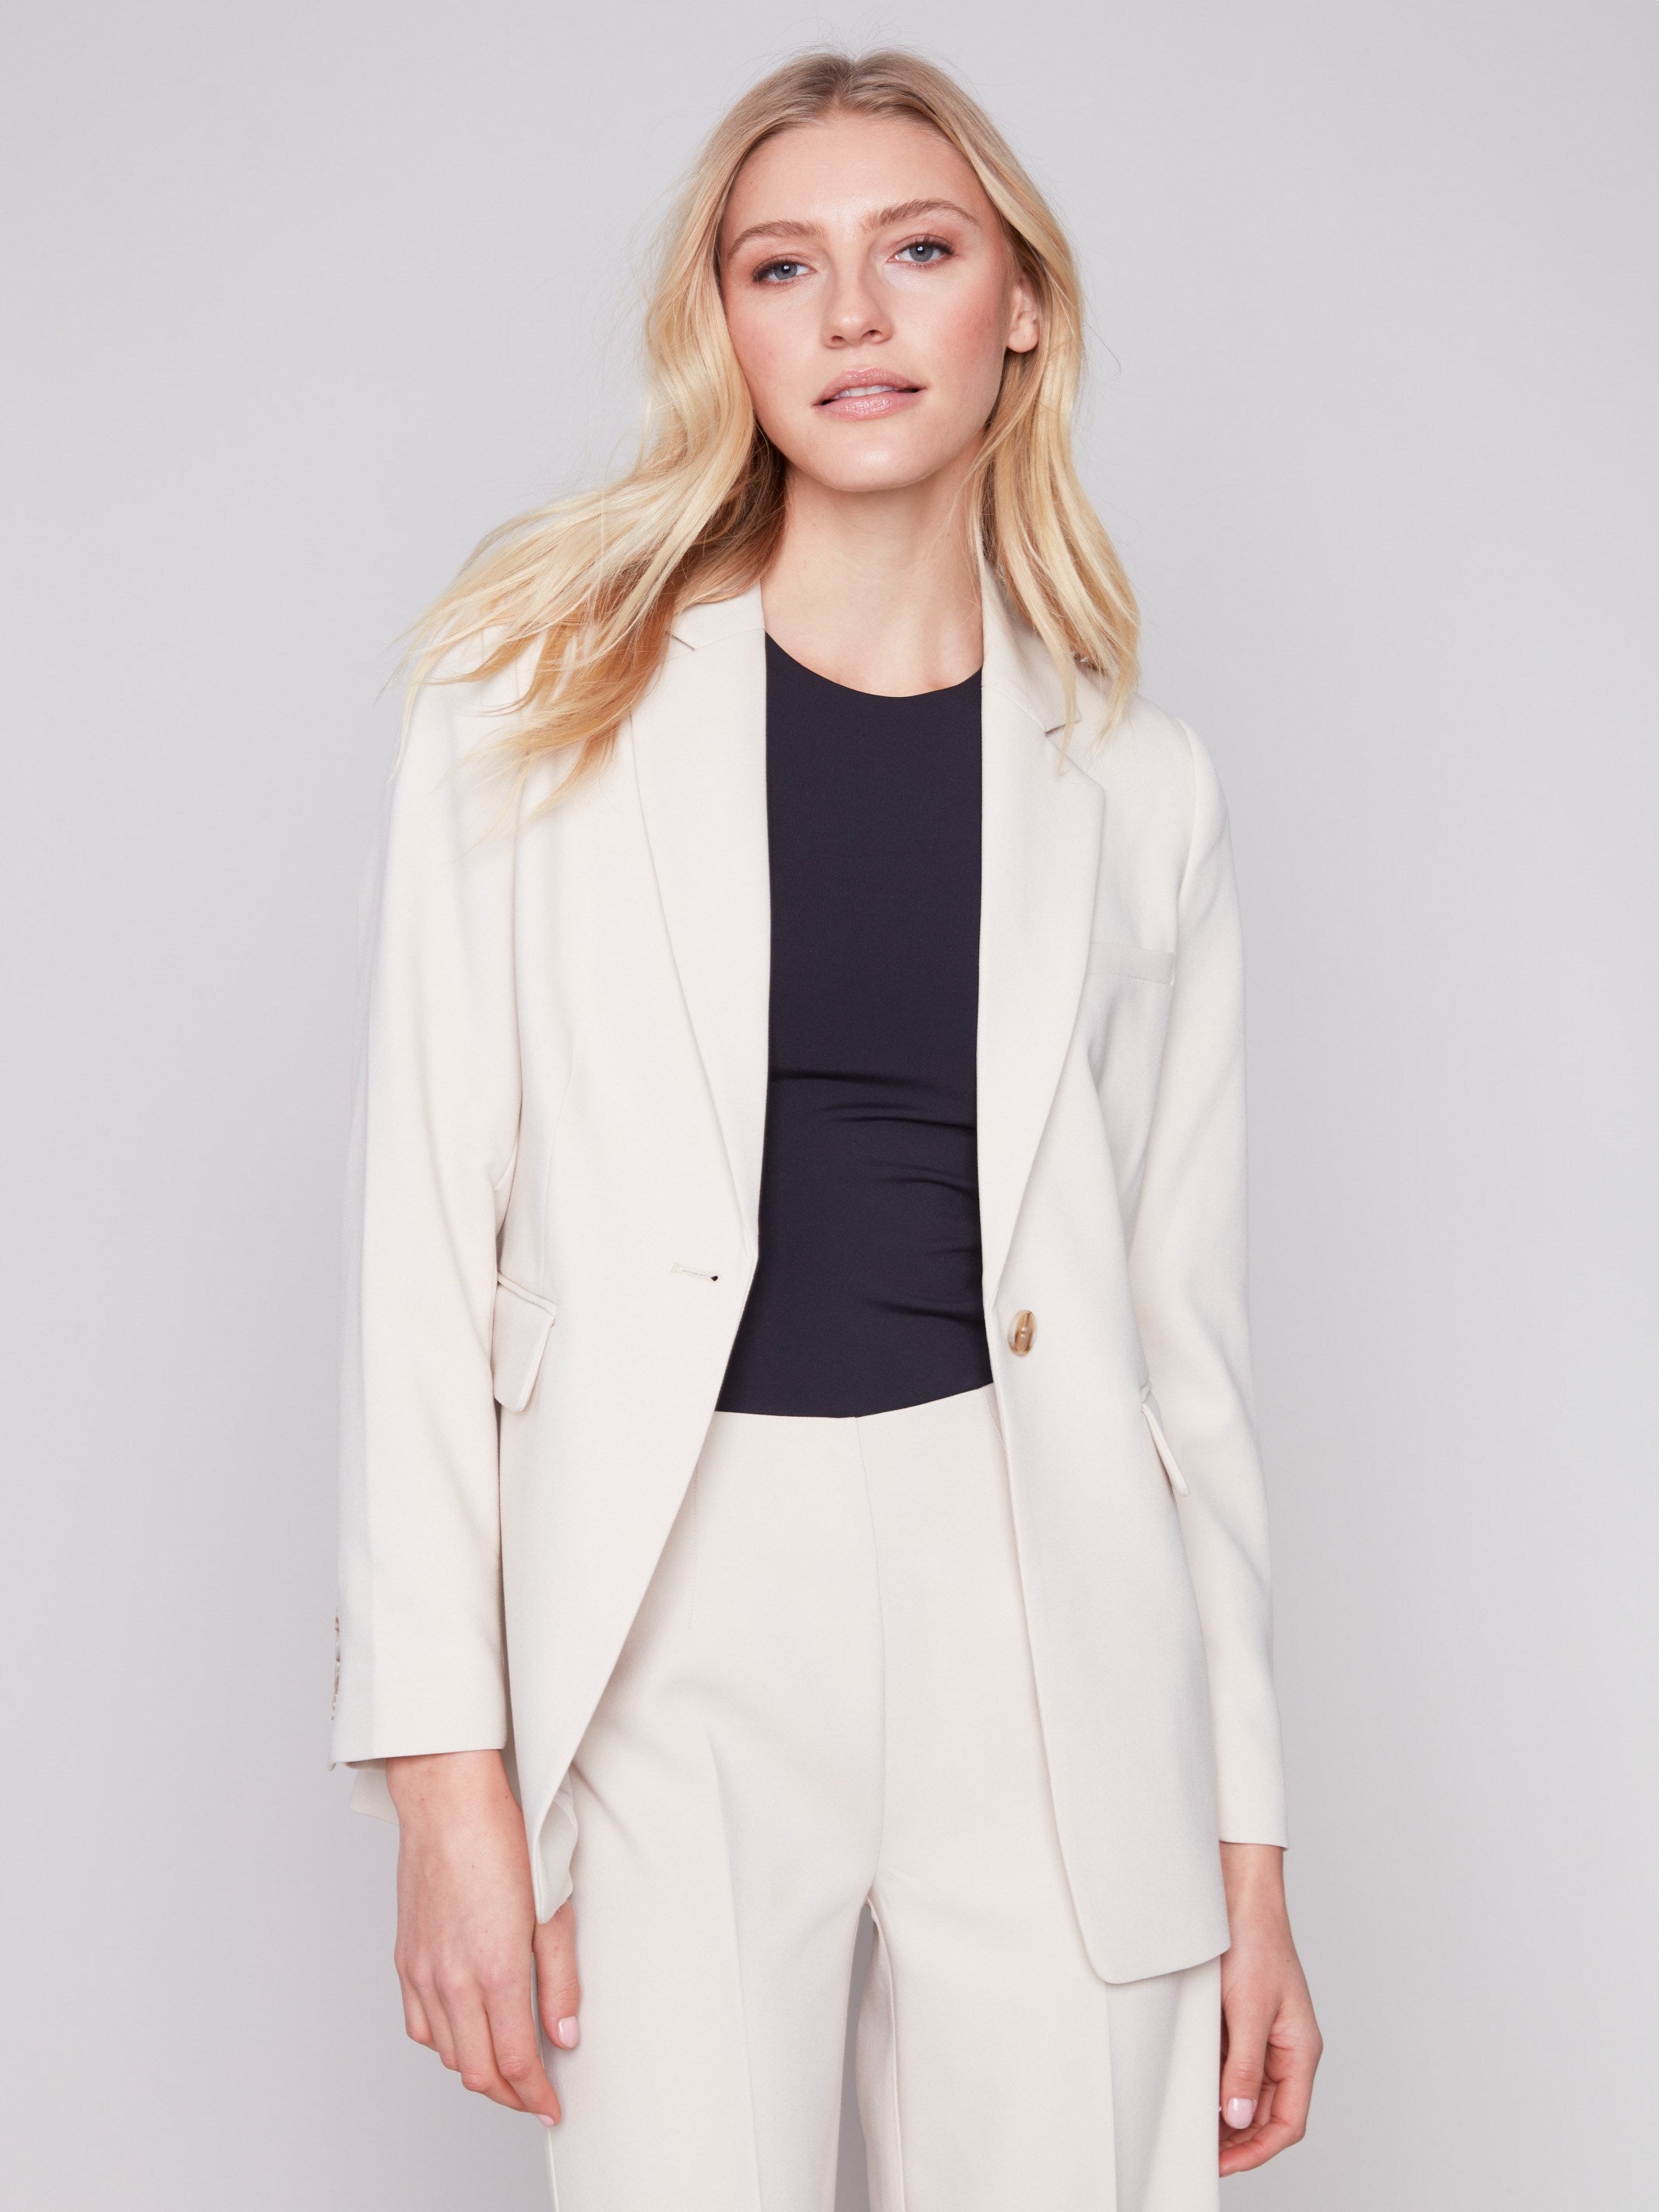 Blazer with Ruched Back - Beige - Charlie B Collection Canada - Image 1